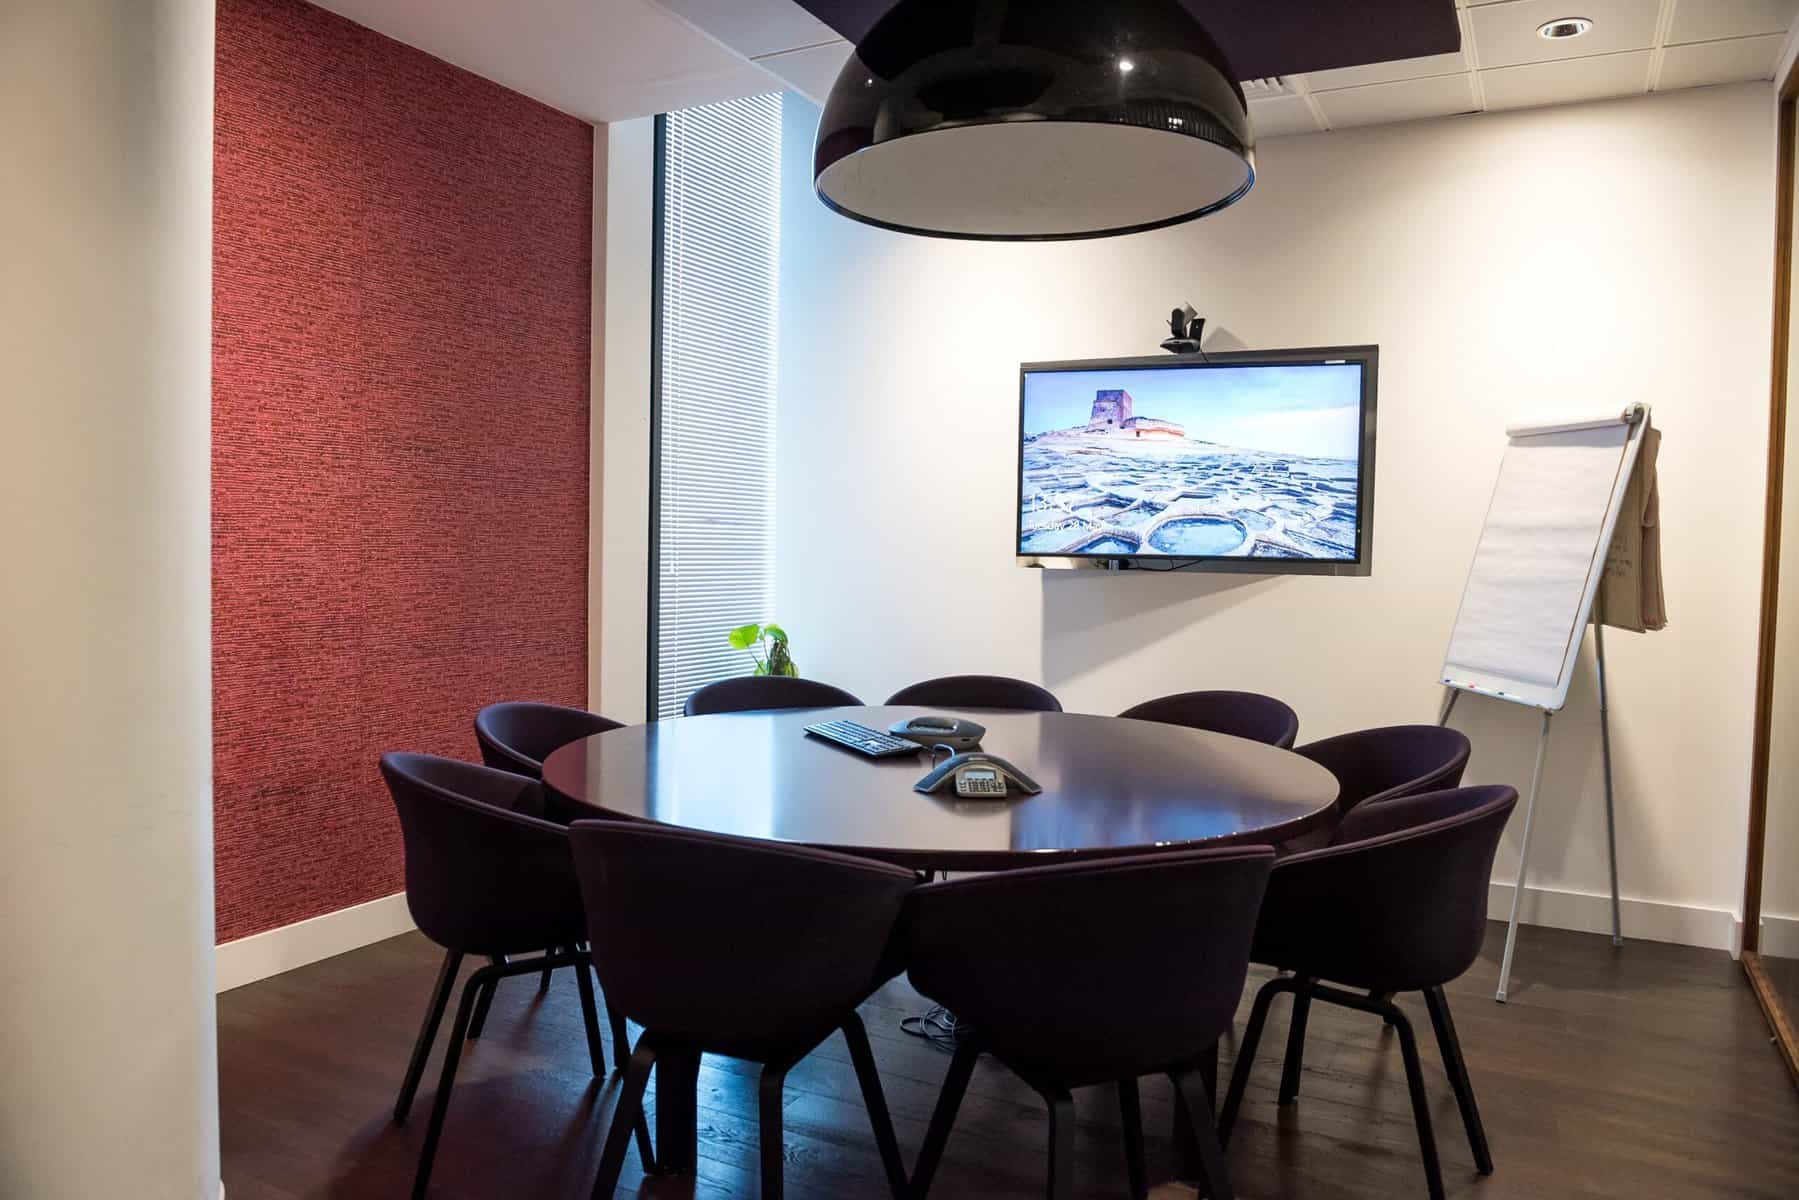 A small 10 person conference room with a webcam mounted above a television.